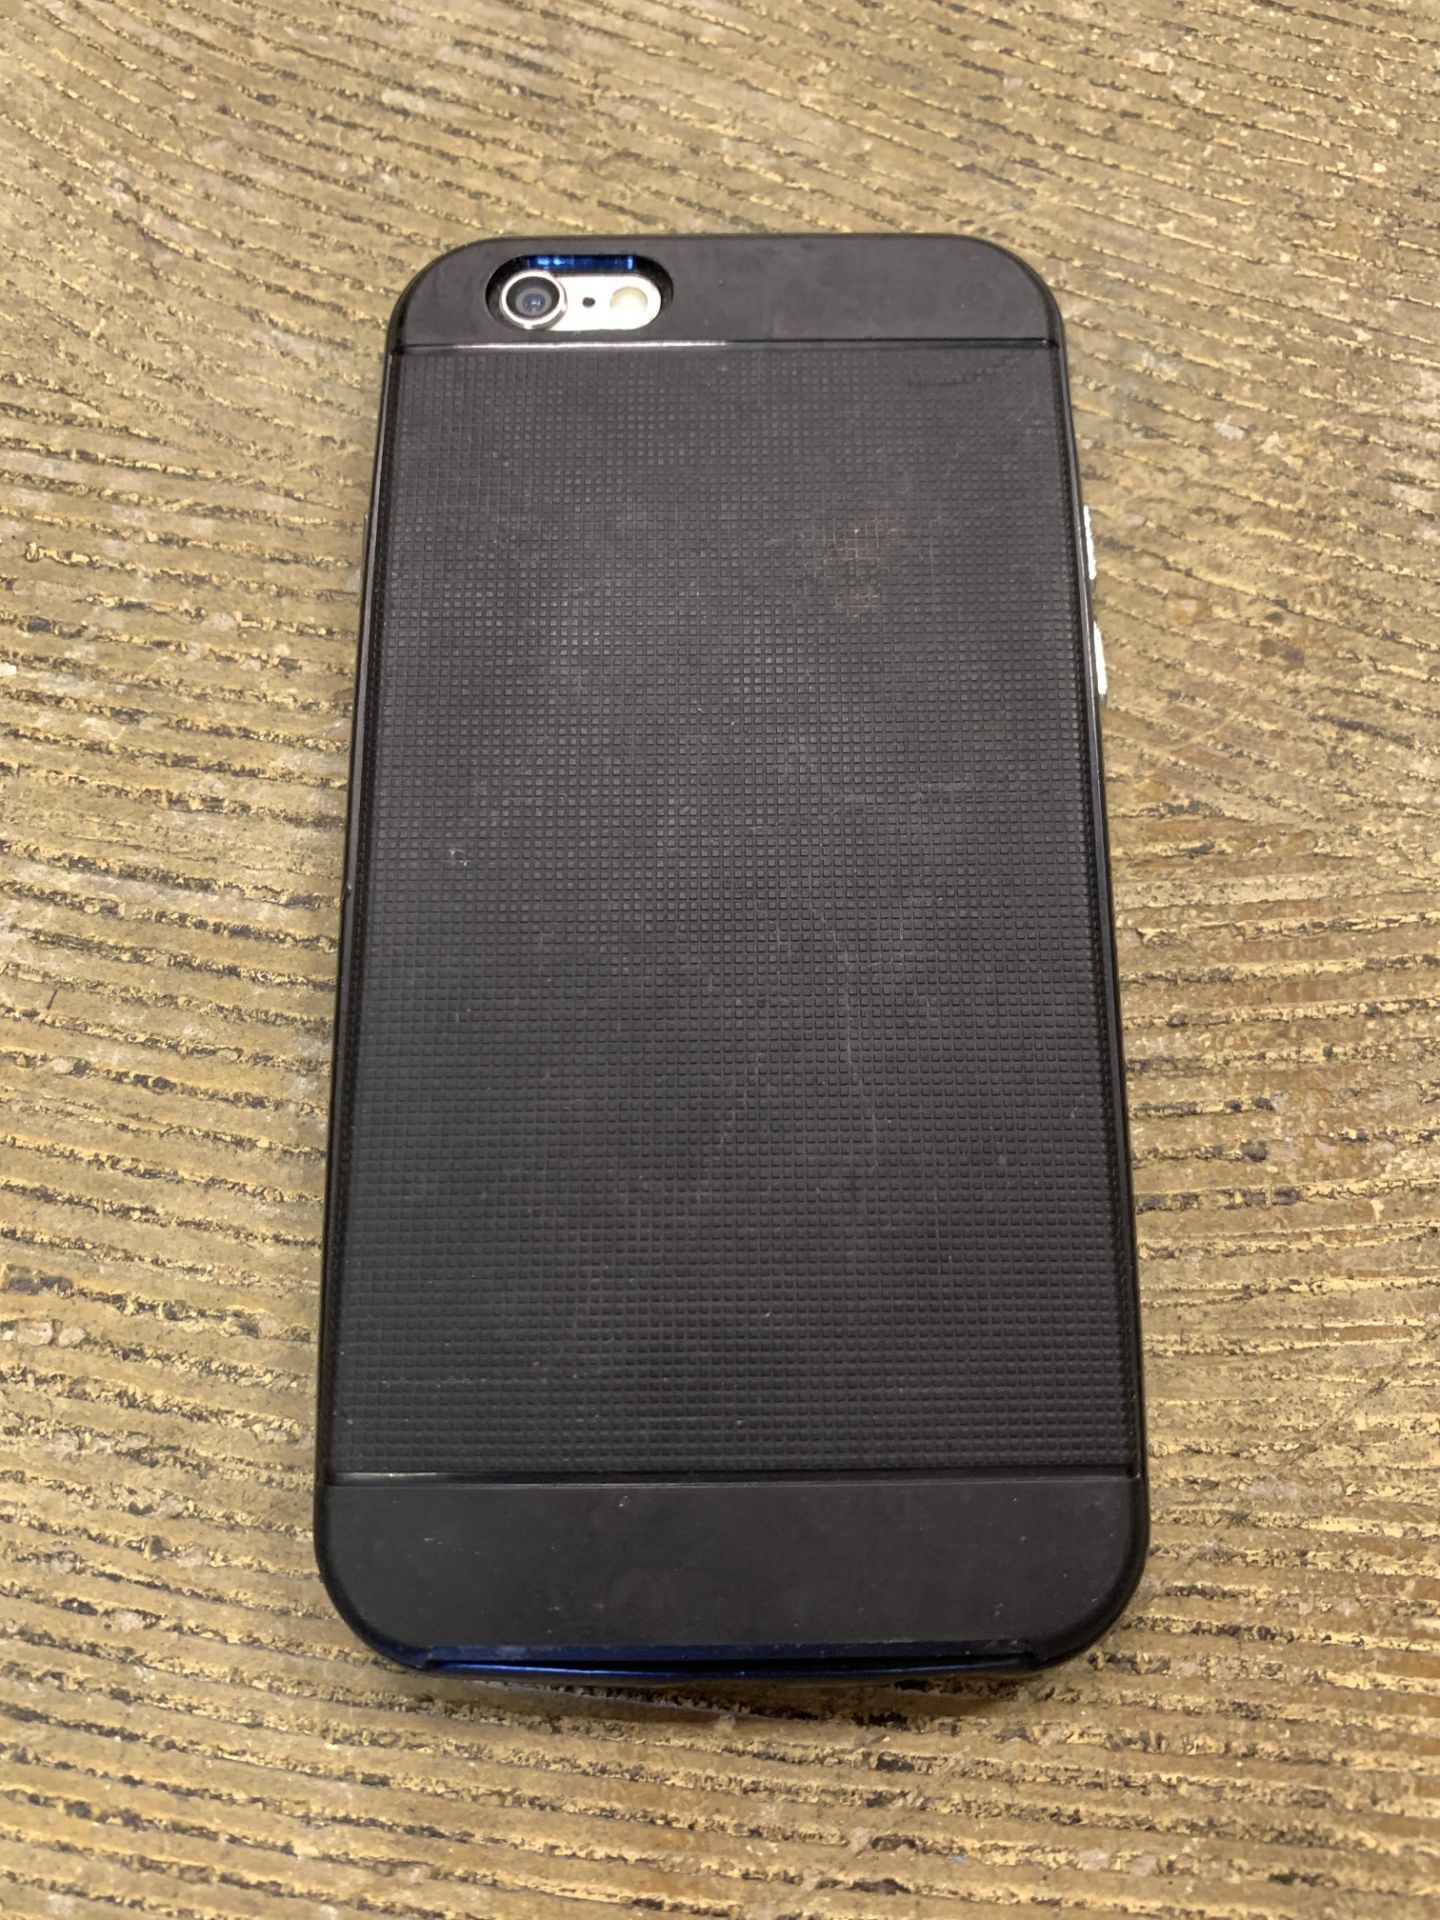 IPHONE 6 with Case - Image 4 of 4